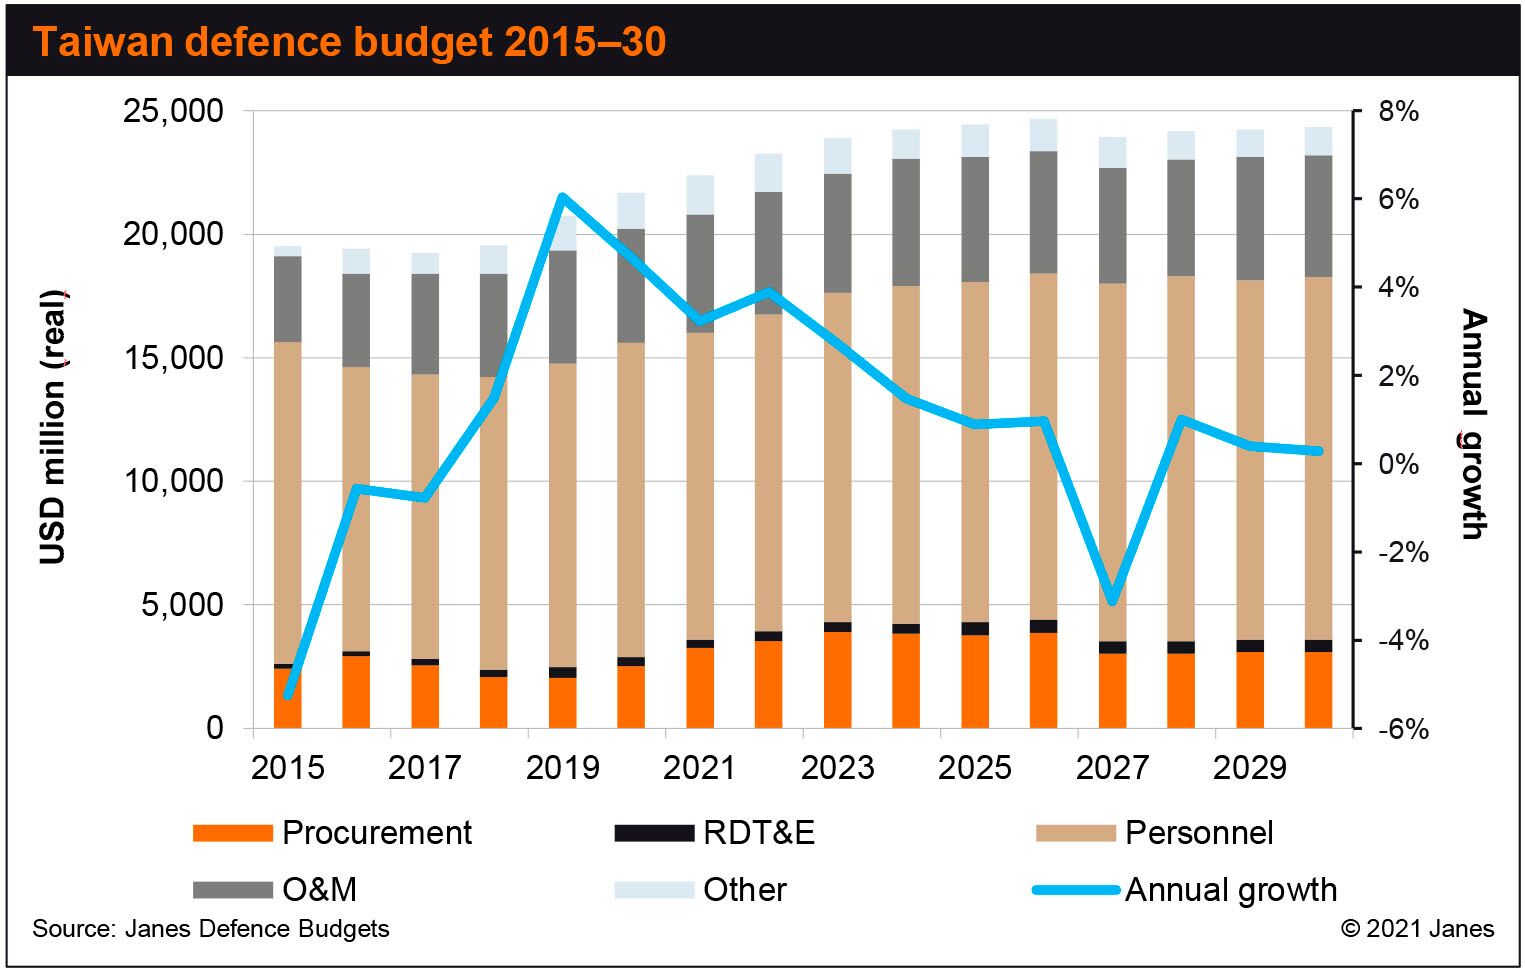 Janes Defence Budgets forecasts strong near-term growth in Taiwan's defence budget. (Janes Defence Budgets)